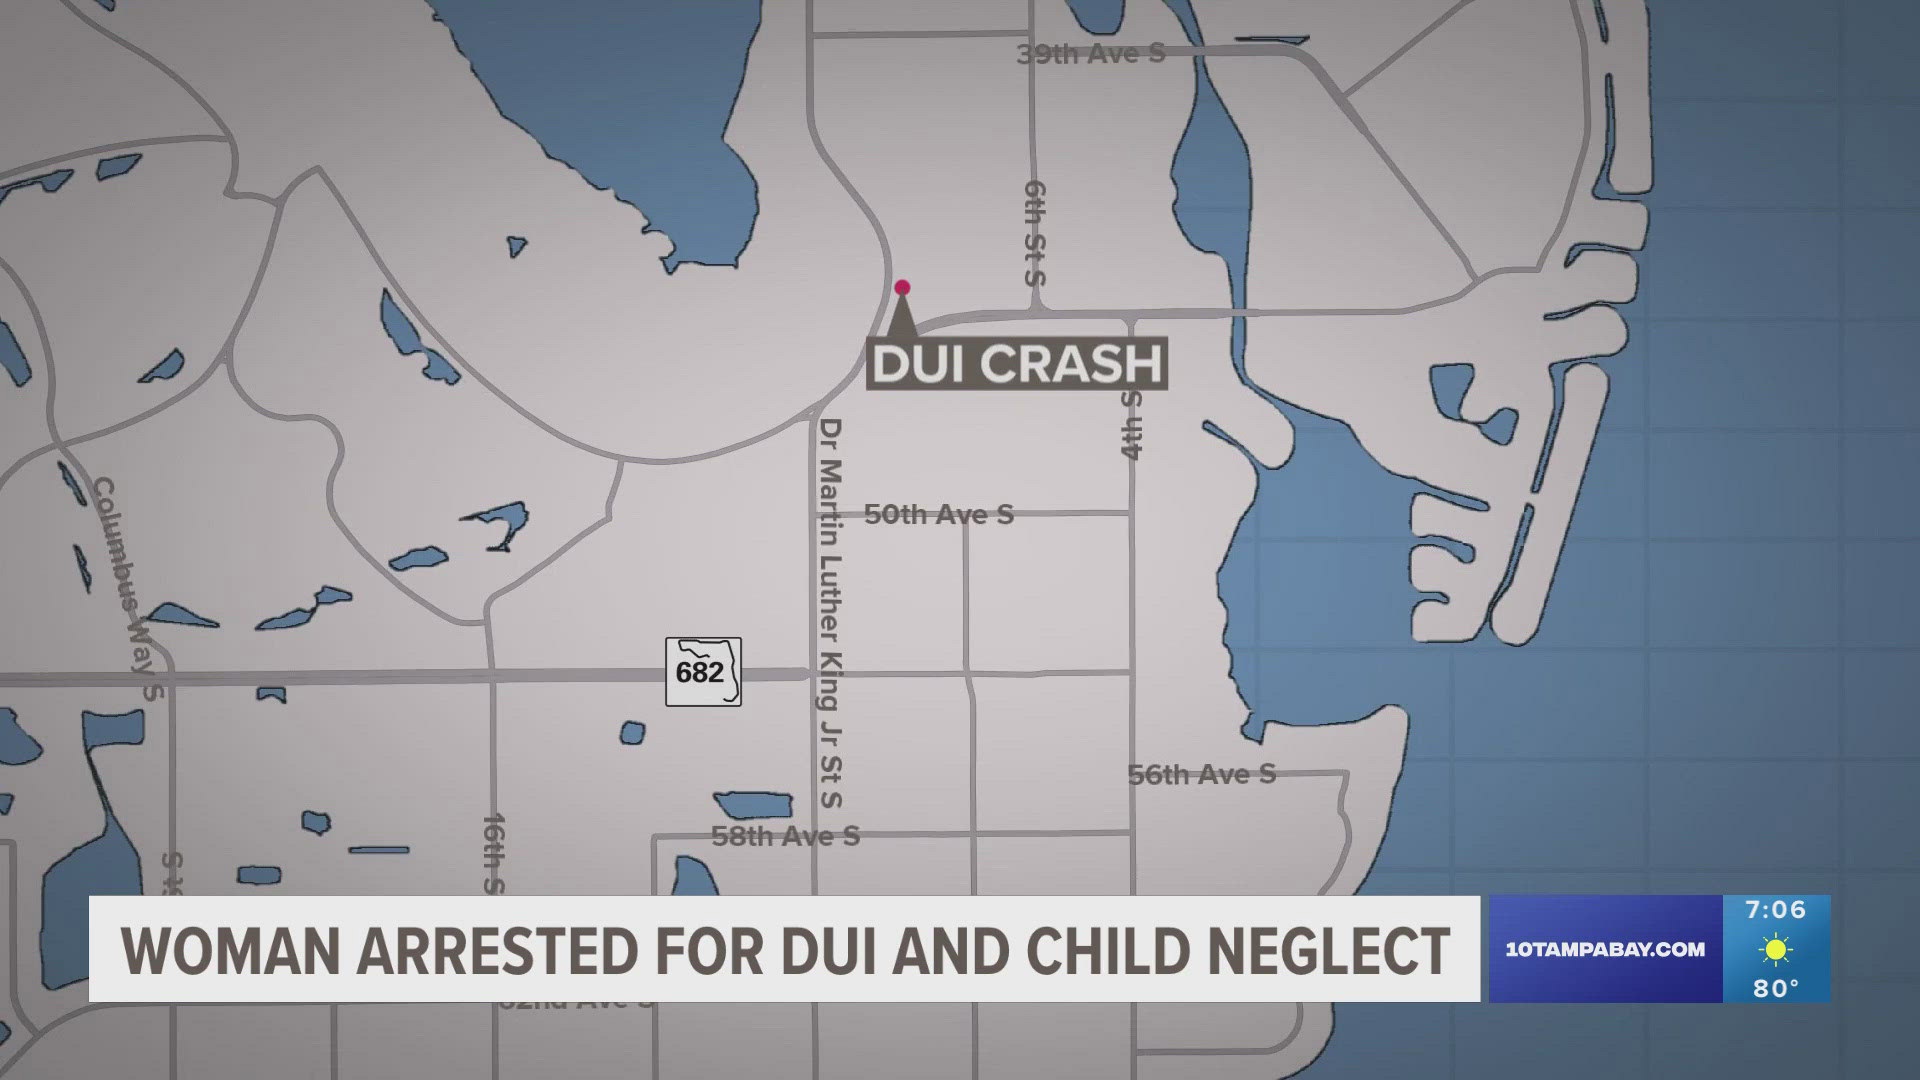 A 2-year-old was ejected from a car after a woman was driving drunk and crashed into a tree, according to police.